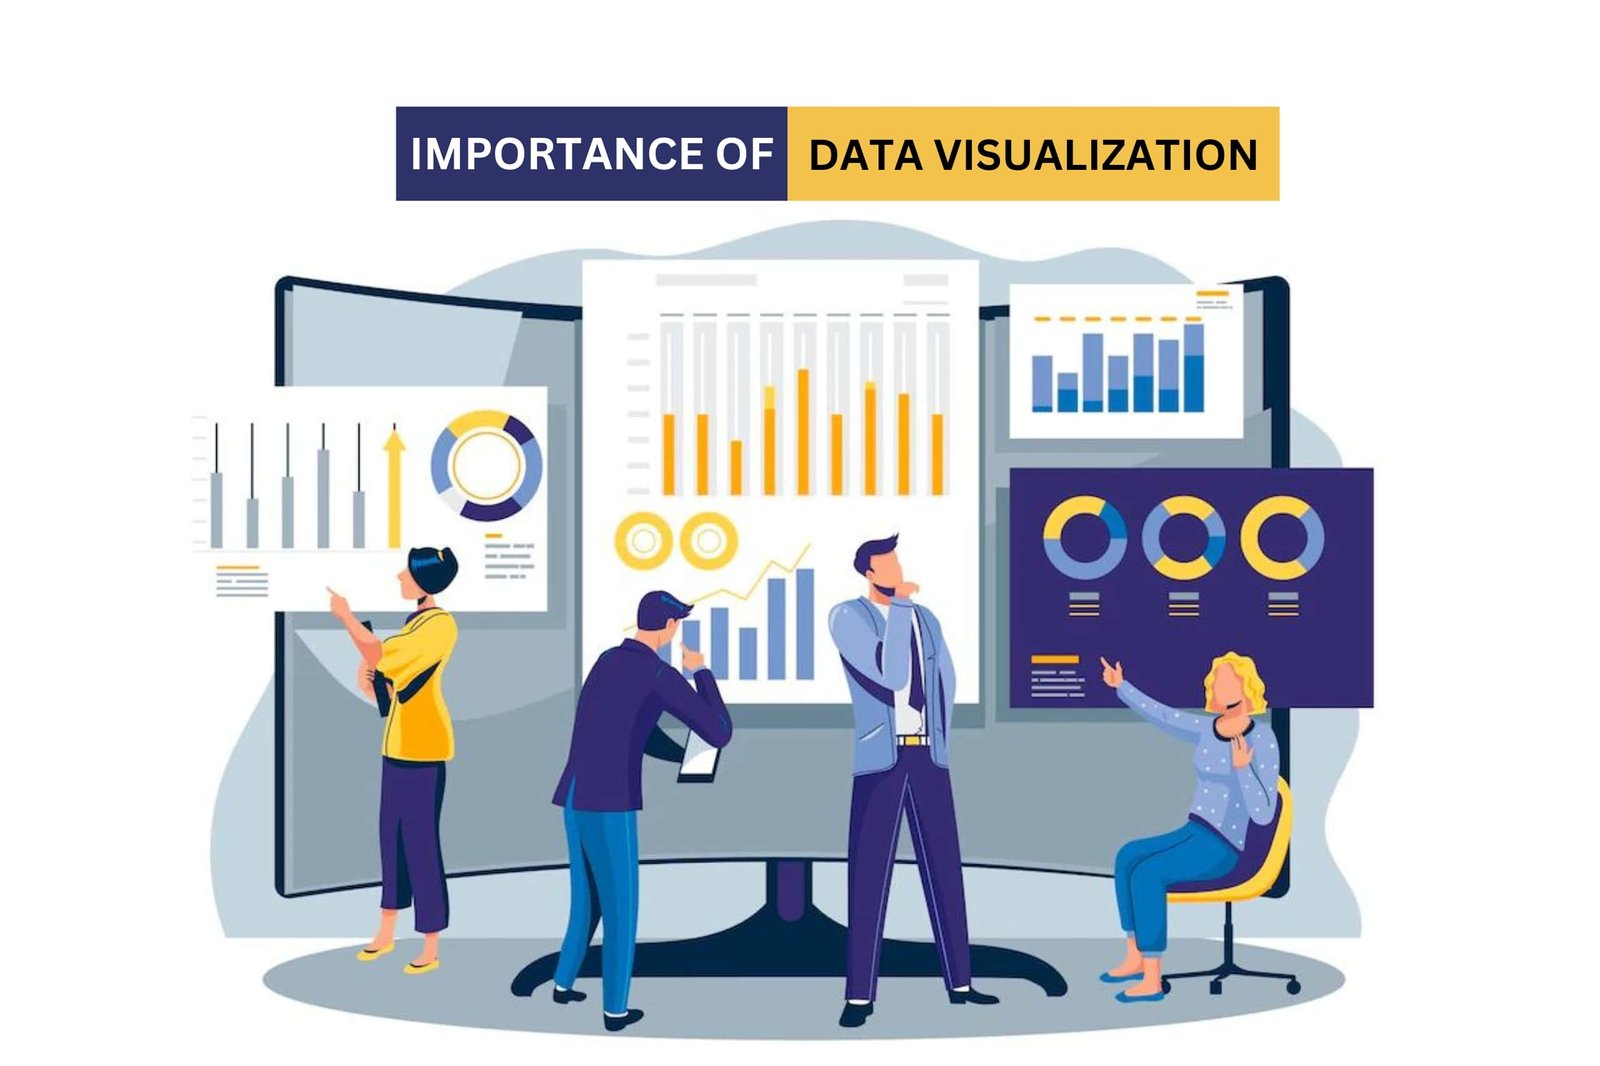 Why is Data Visualization important?